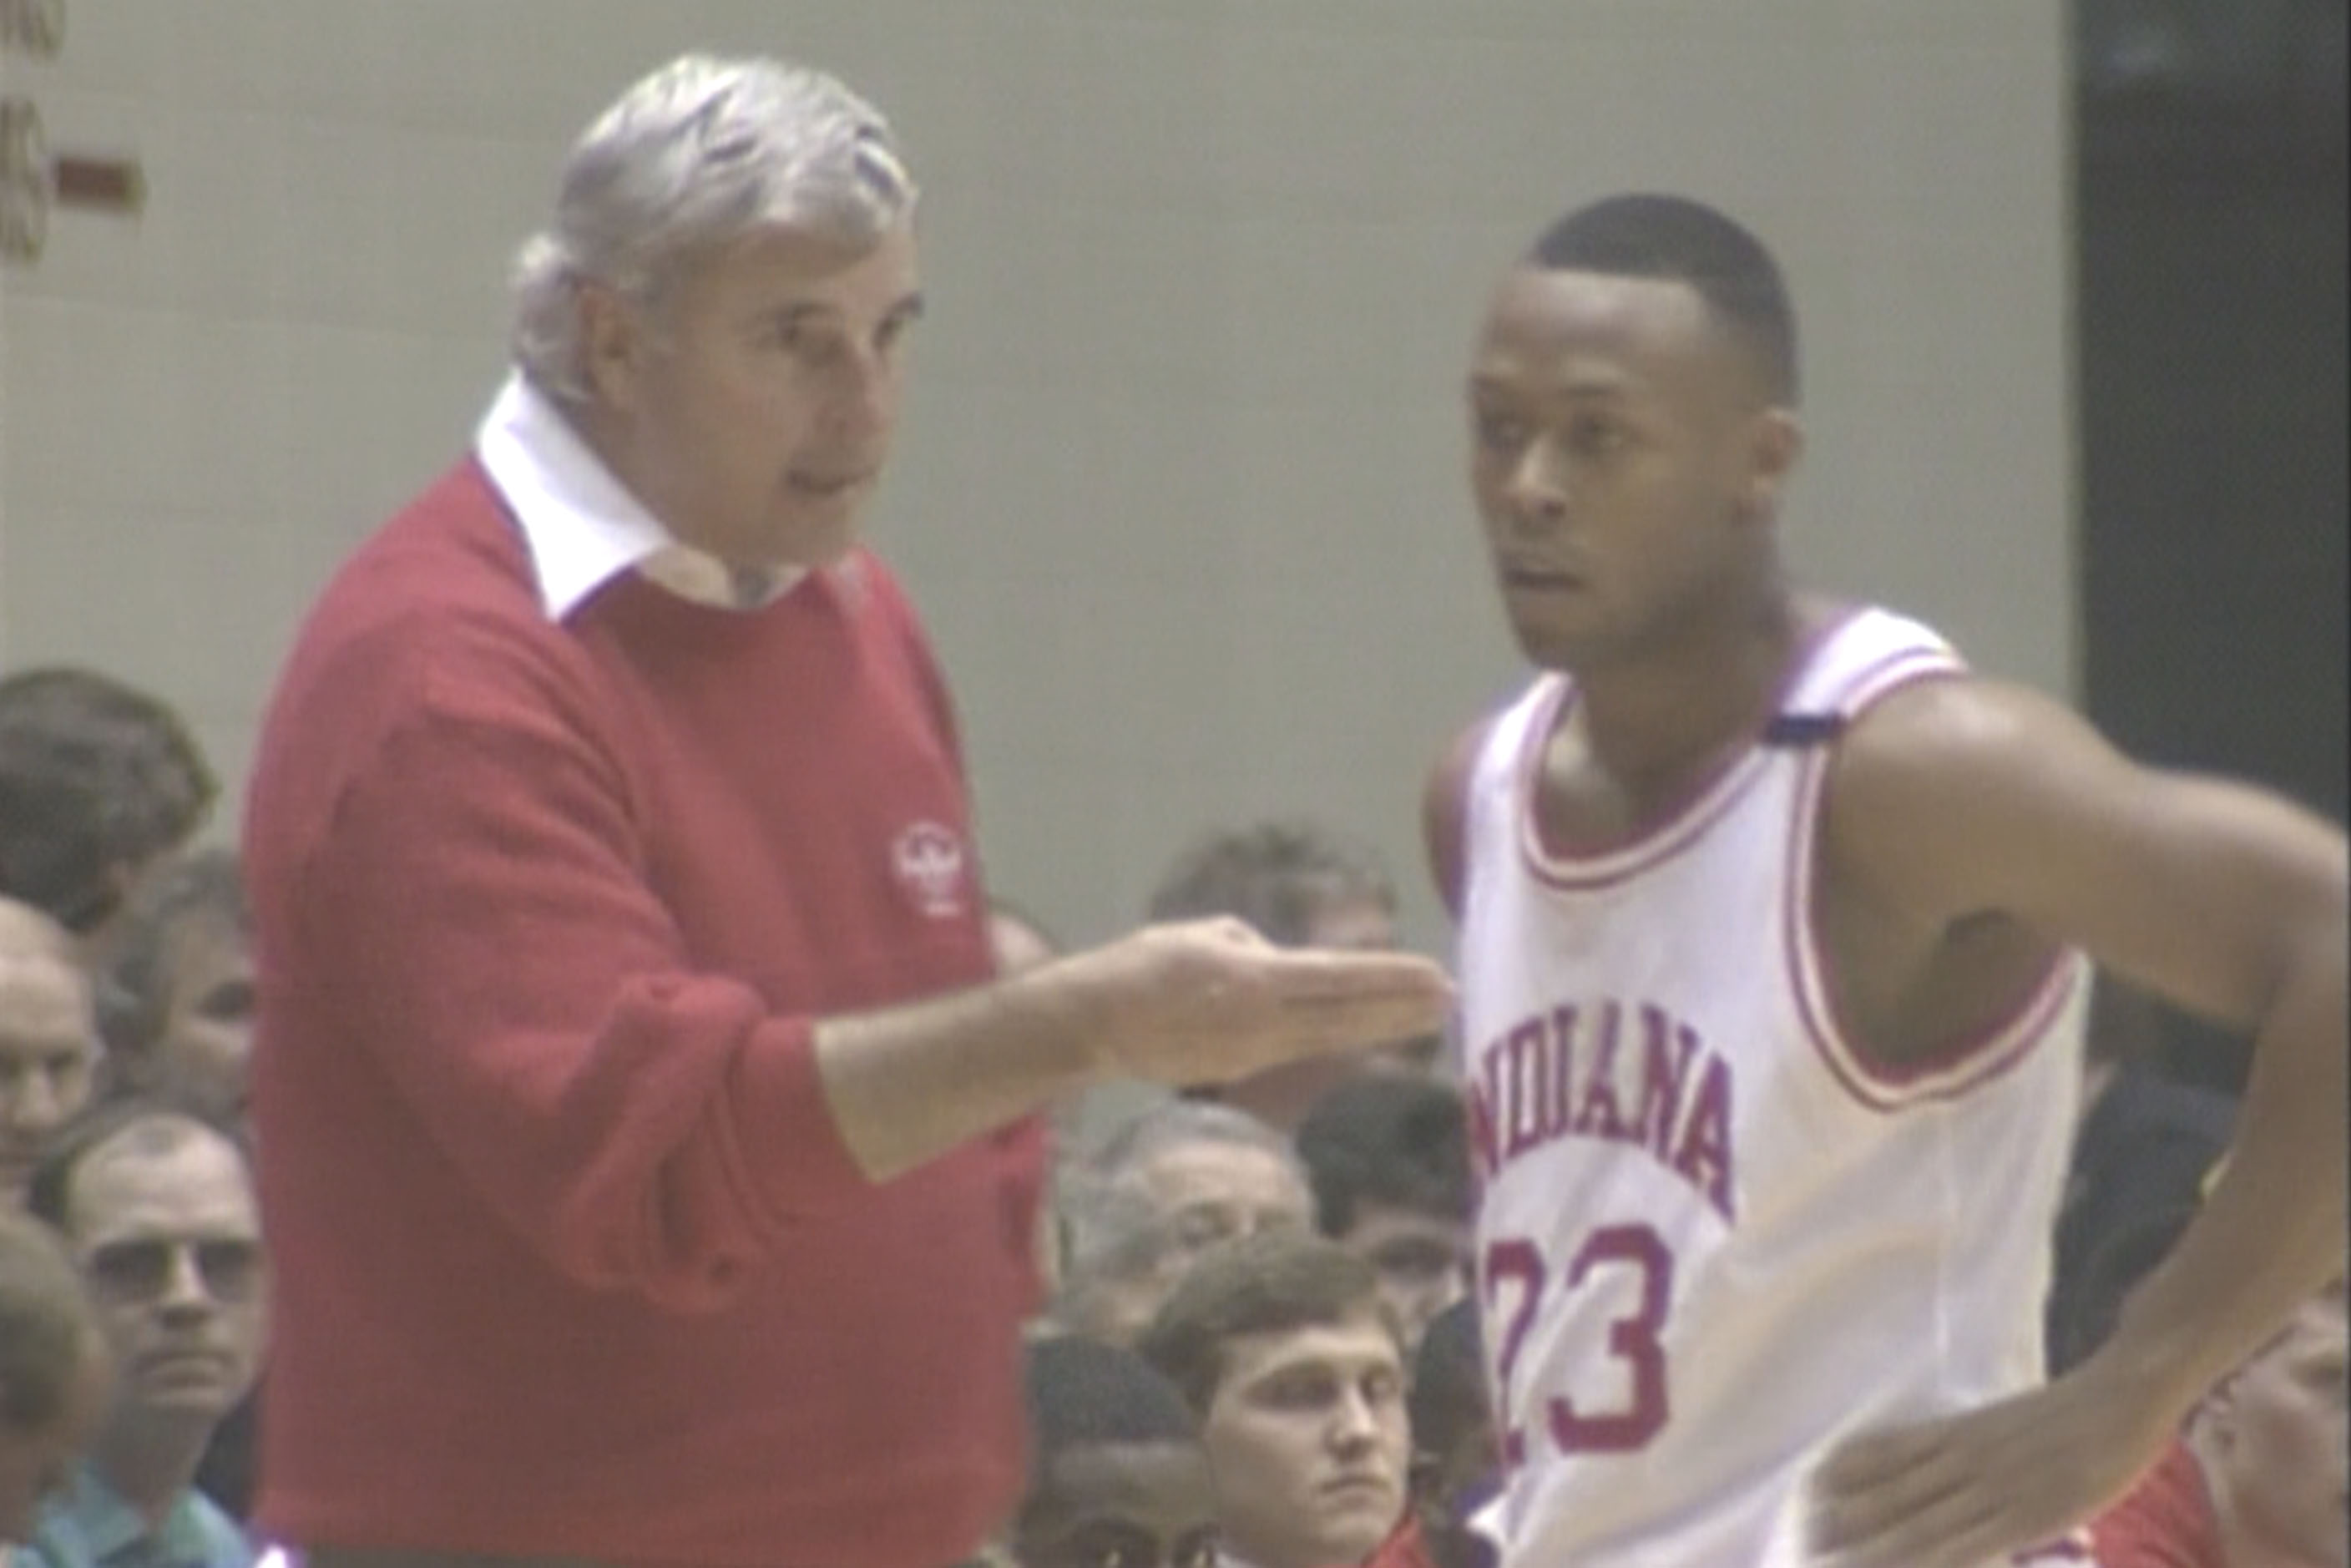 Indiana coach Bob Knight gives instructions to Jamal Meeks during a game at Assembly Hall.